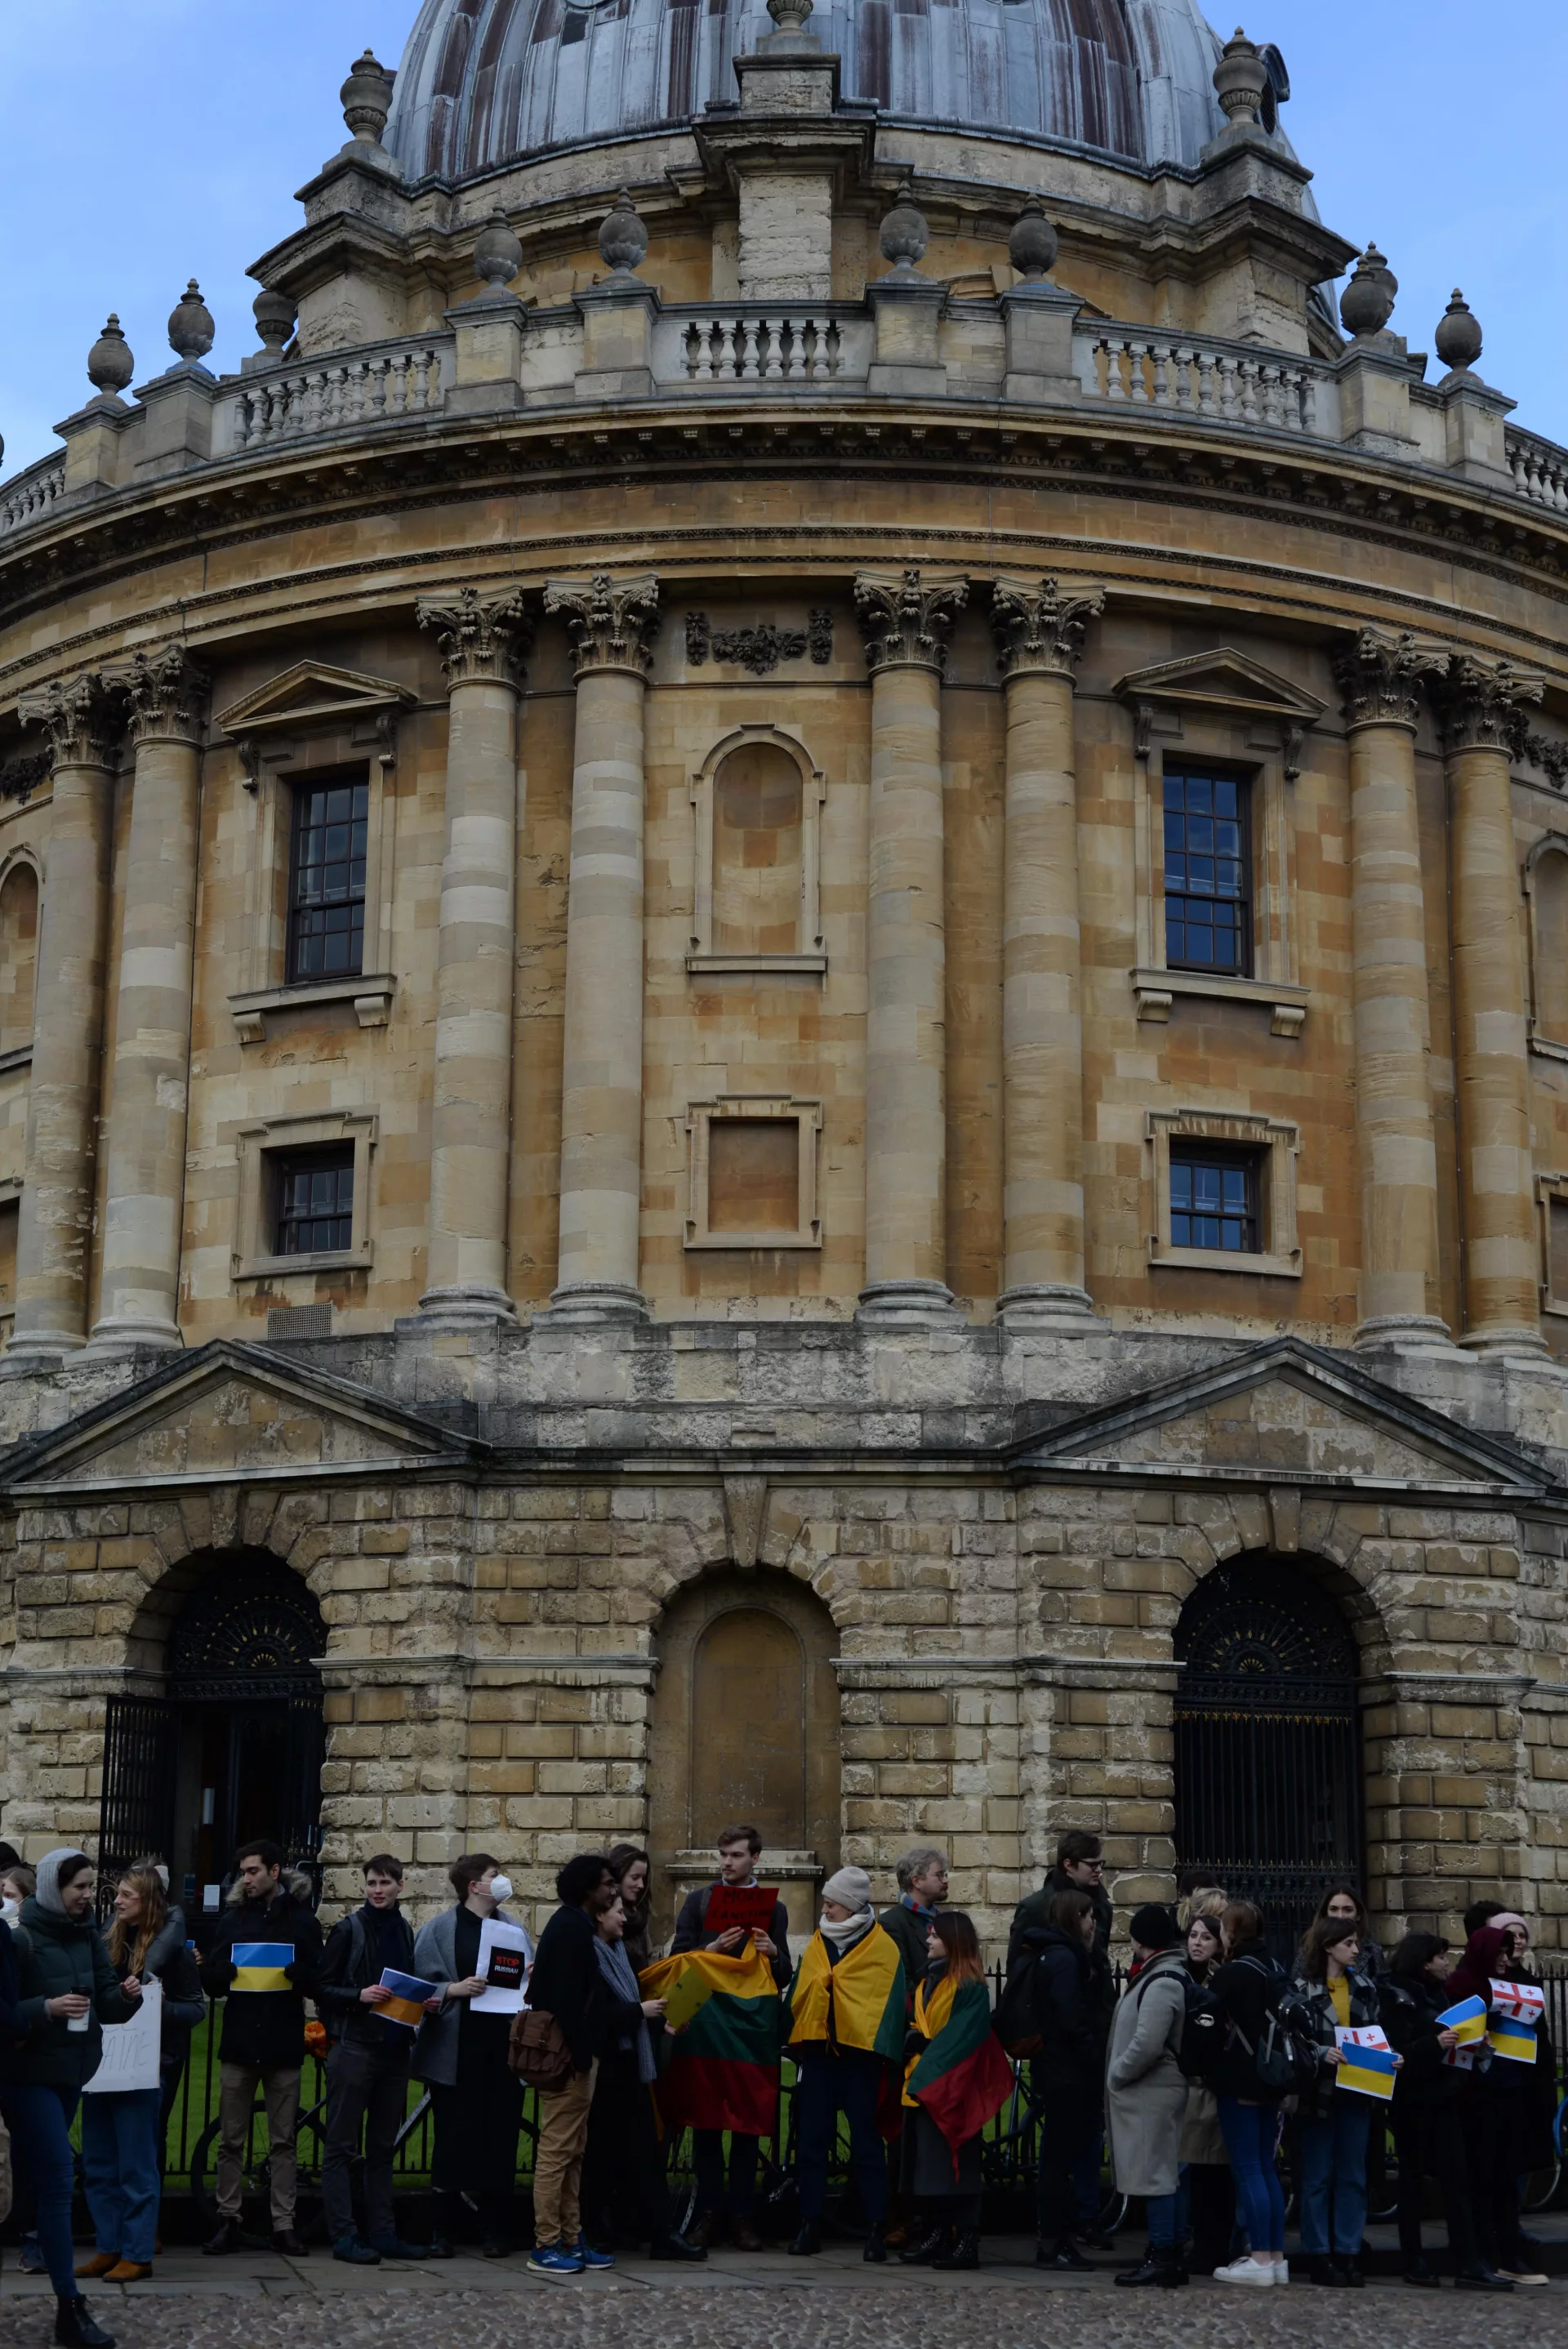 Oxford received this award, in part, for its generous scholarships for refugees, including the Graduate Scholarships for Ukraine, launched last year.